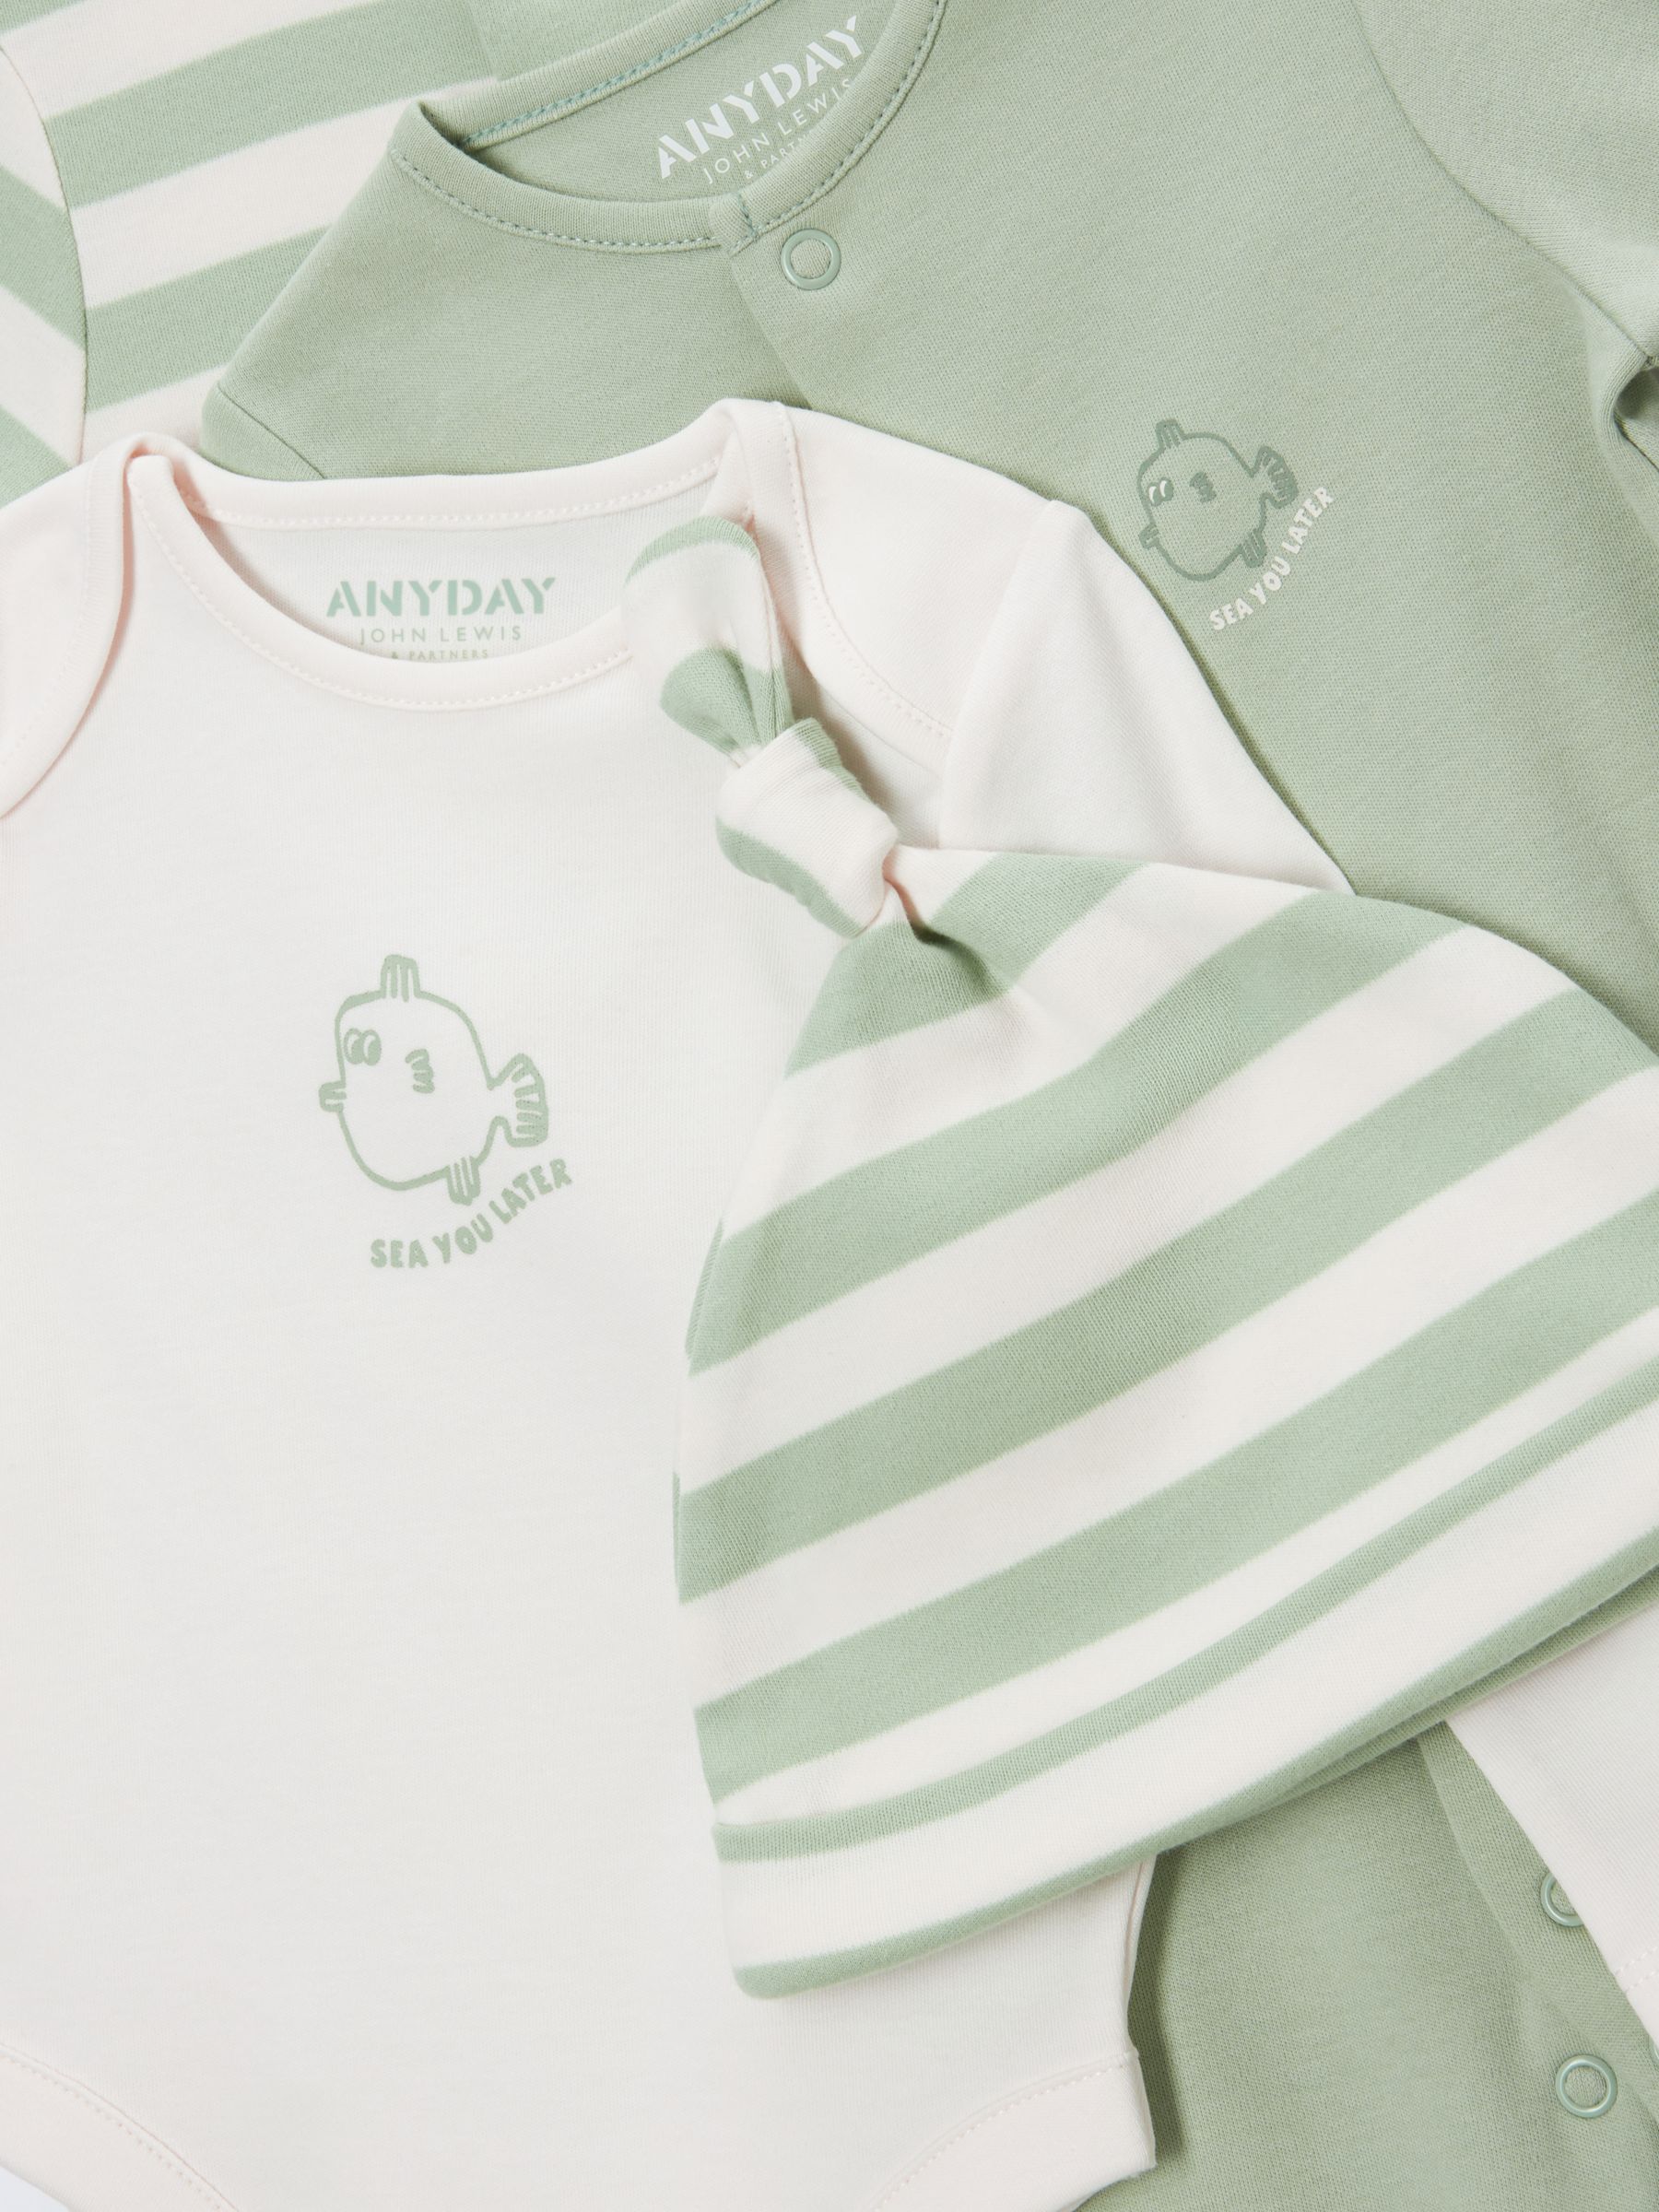 Buy John Lewis ANYDAY Baby Sleepsuit, Bodysuit and Hat Set, Green Online at johnlewis.com